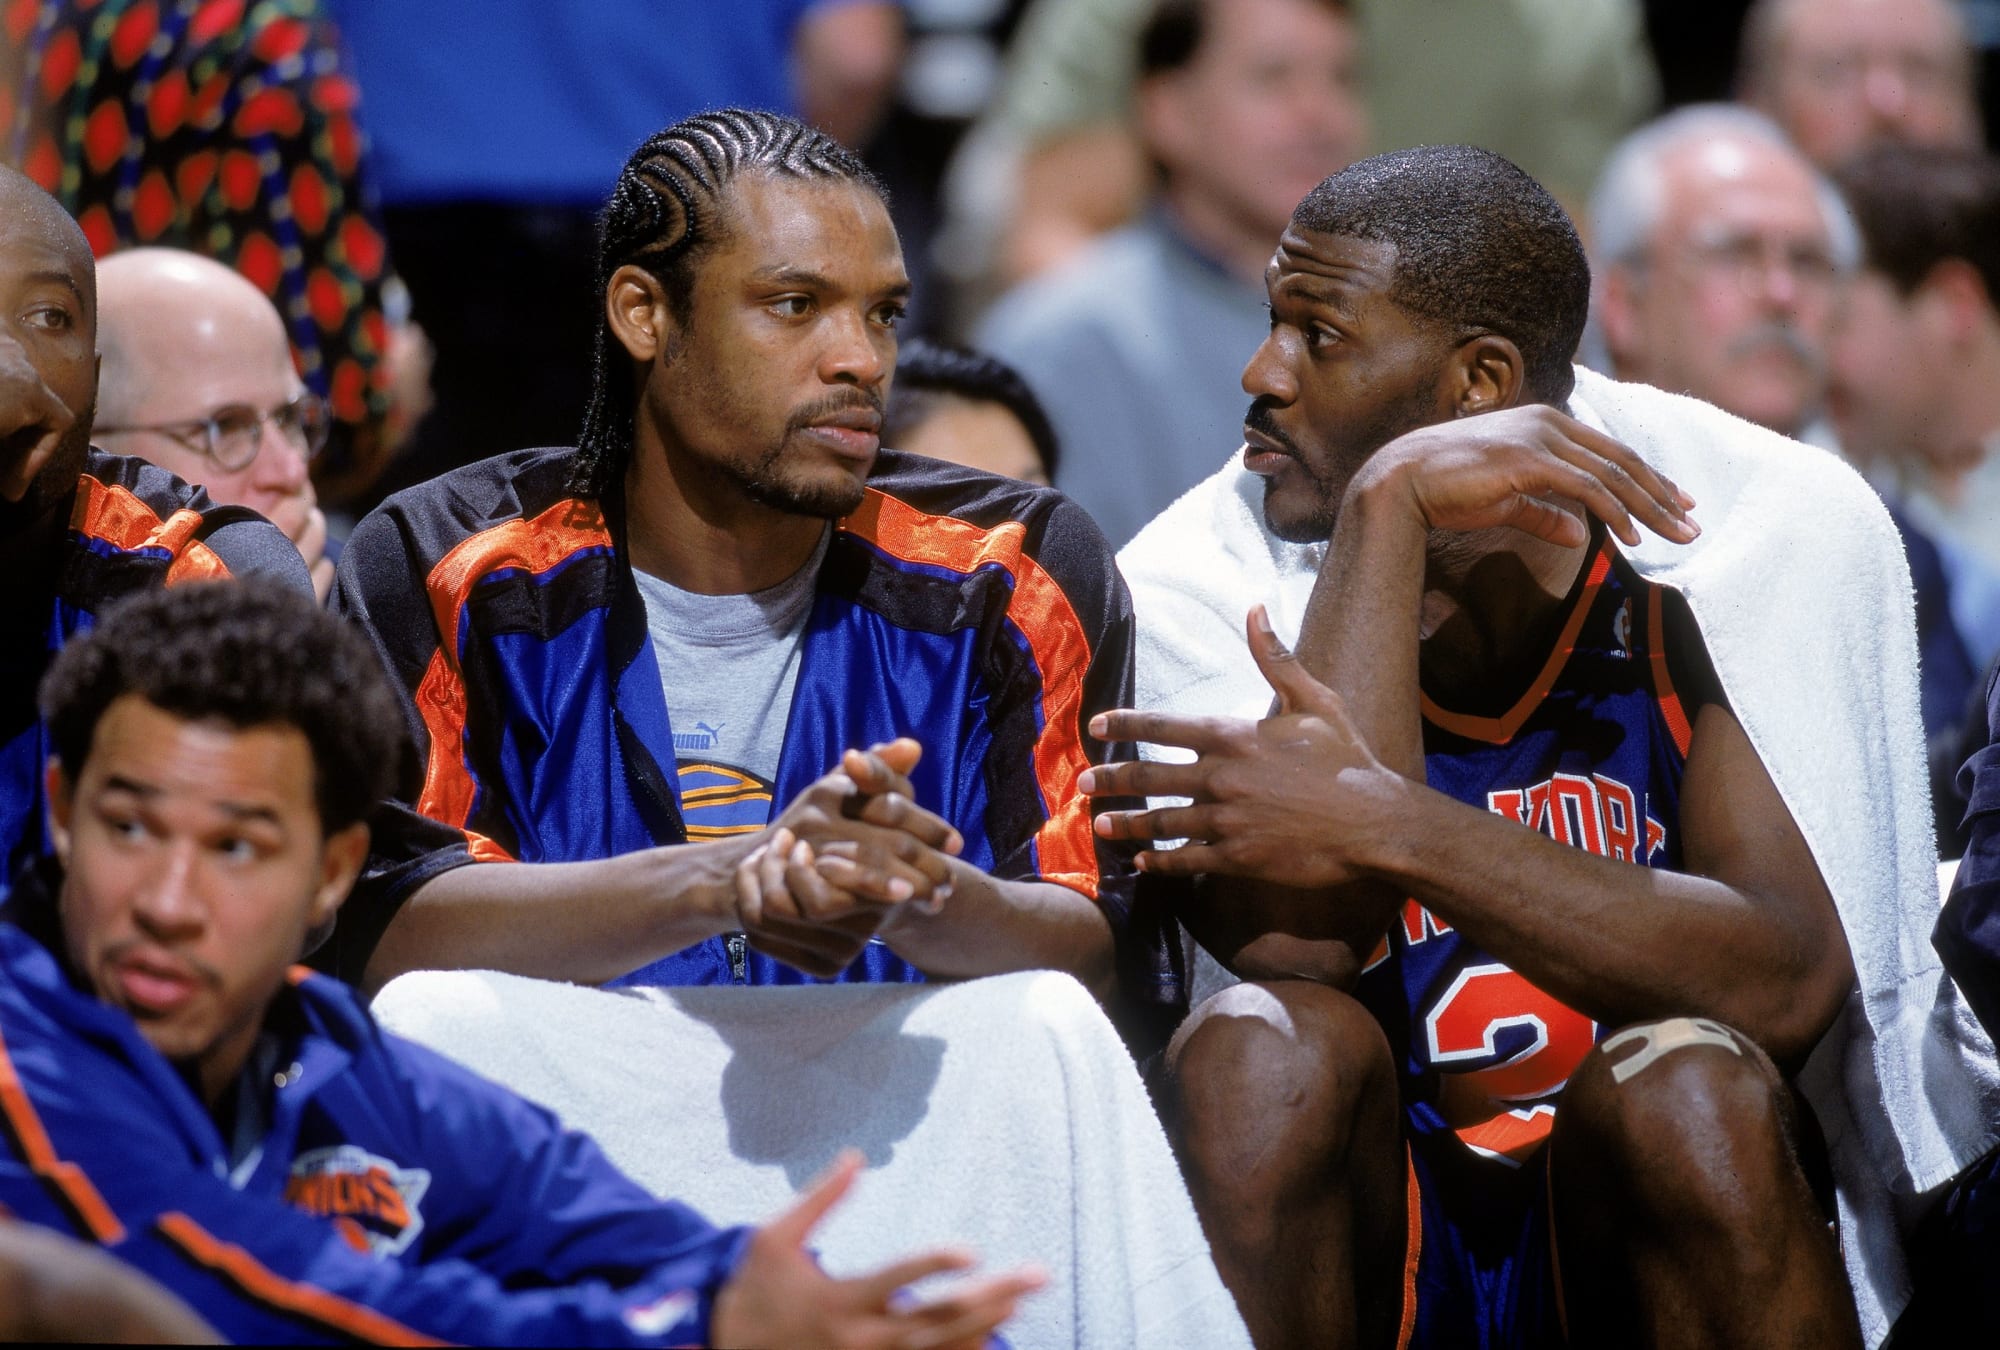 This week in Knicks history: New York sweeps the Hawks in the '99